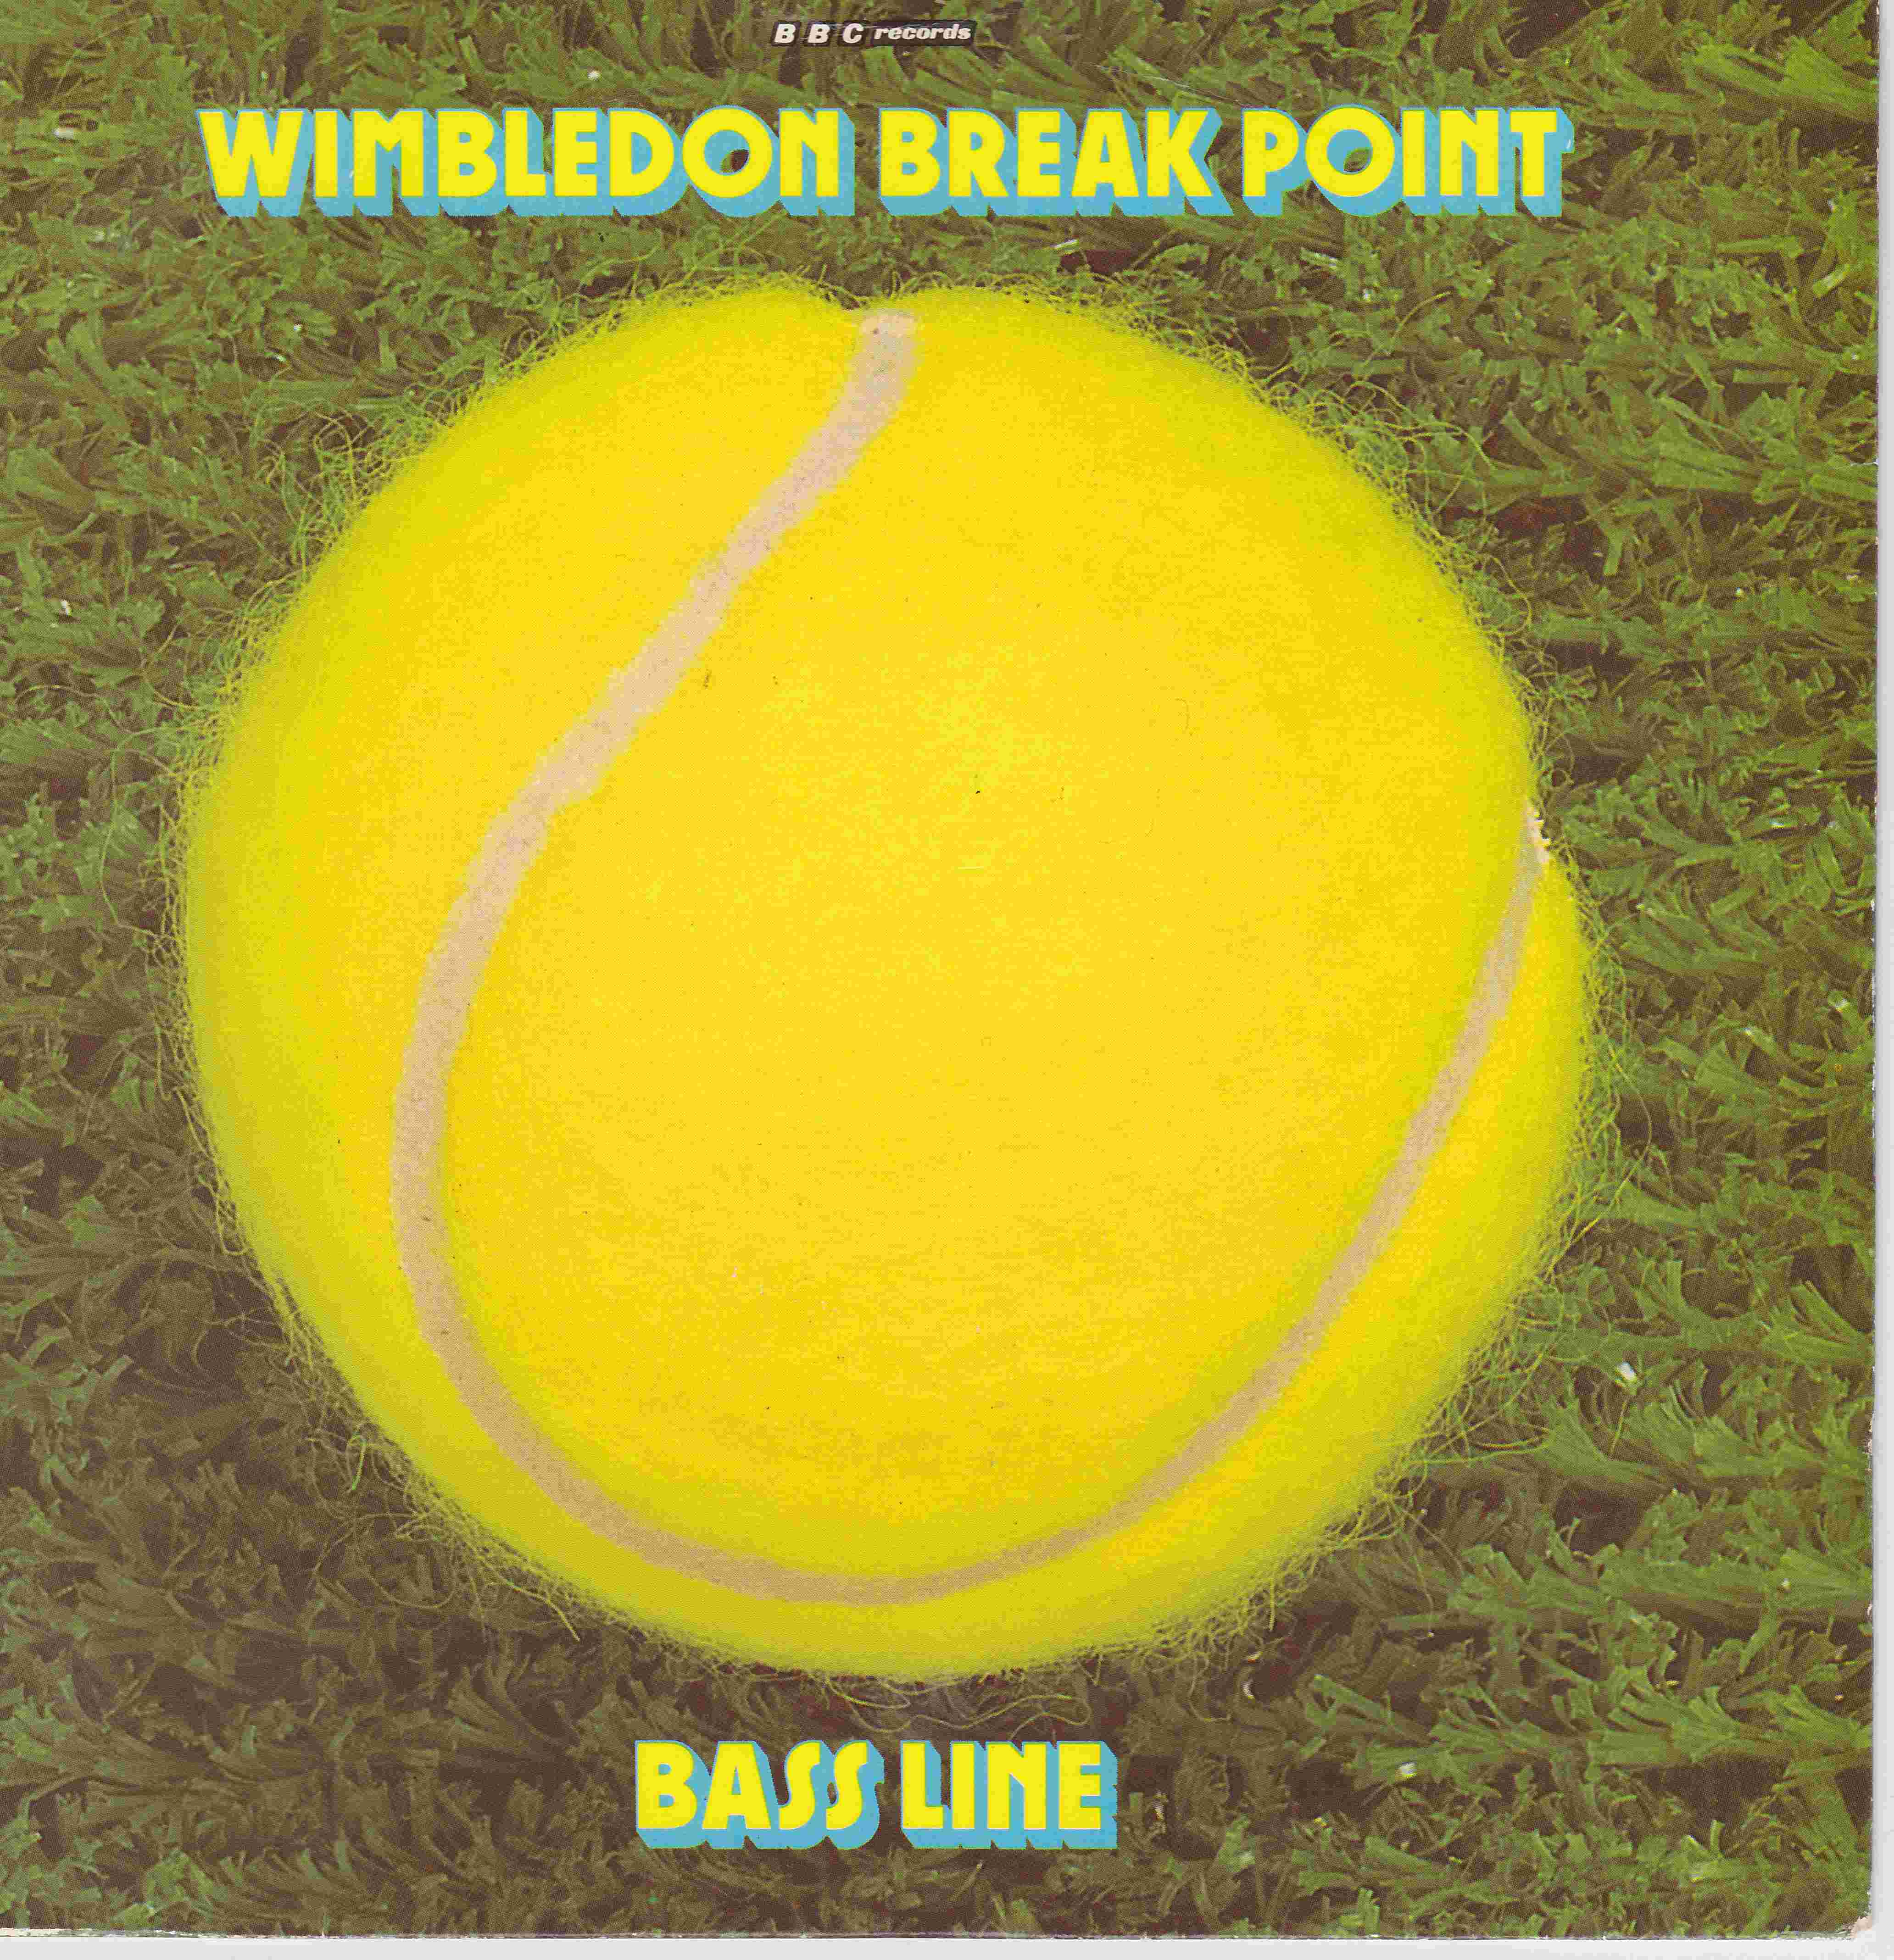 Picture of RESL 172 Wimbledon breakpoint by artist Baseline from the BBC records and Tapes library